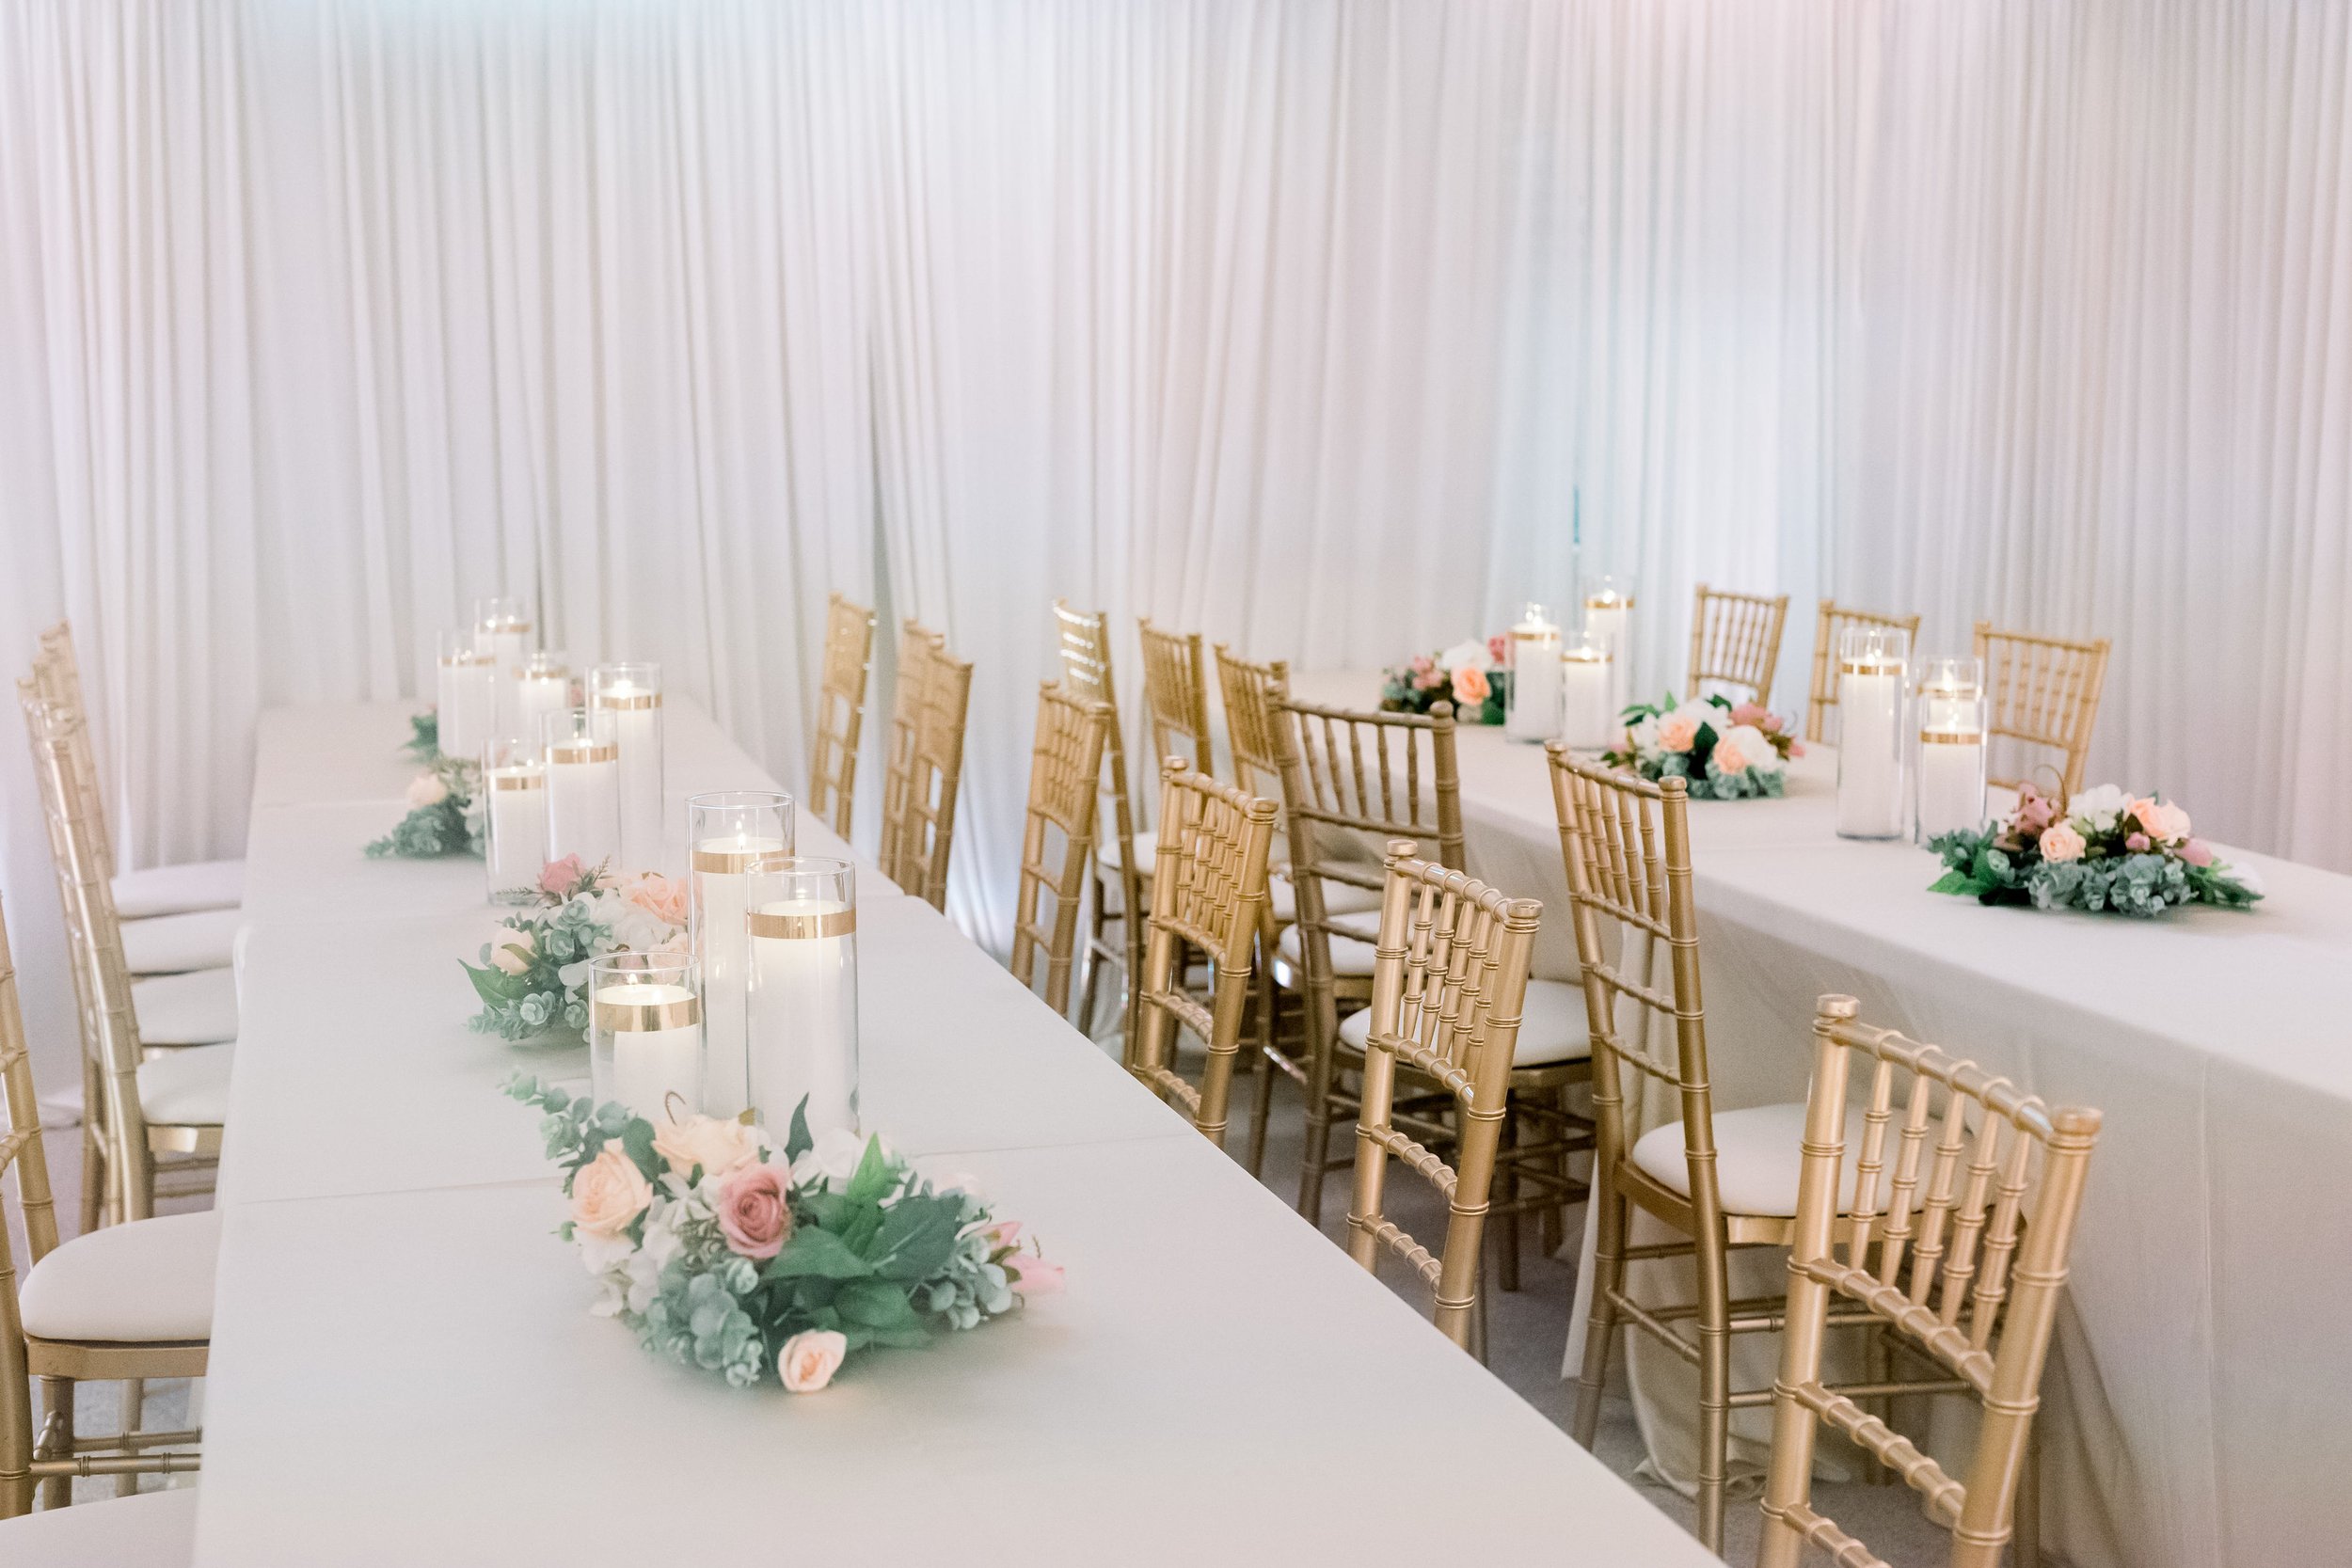 Basement wall draping wedding in the living room garage wall draping intimate wedding at home micro wedding event in chicago chiavari chairs table ren (3).jpg